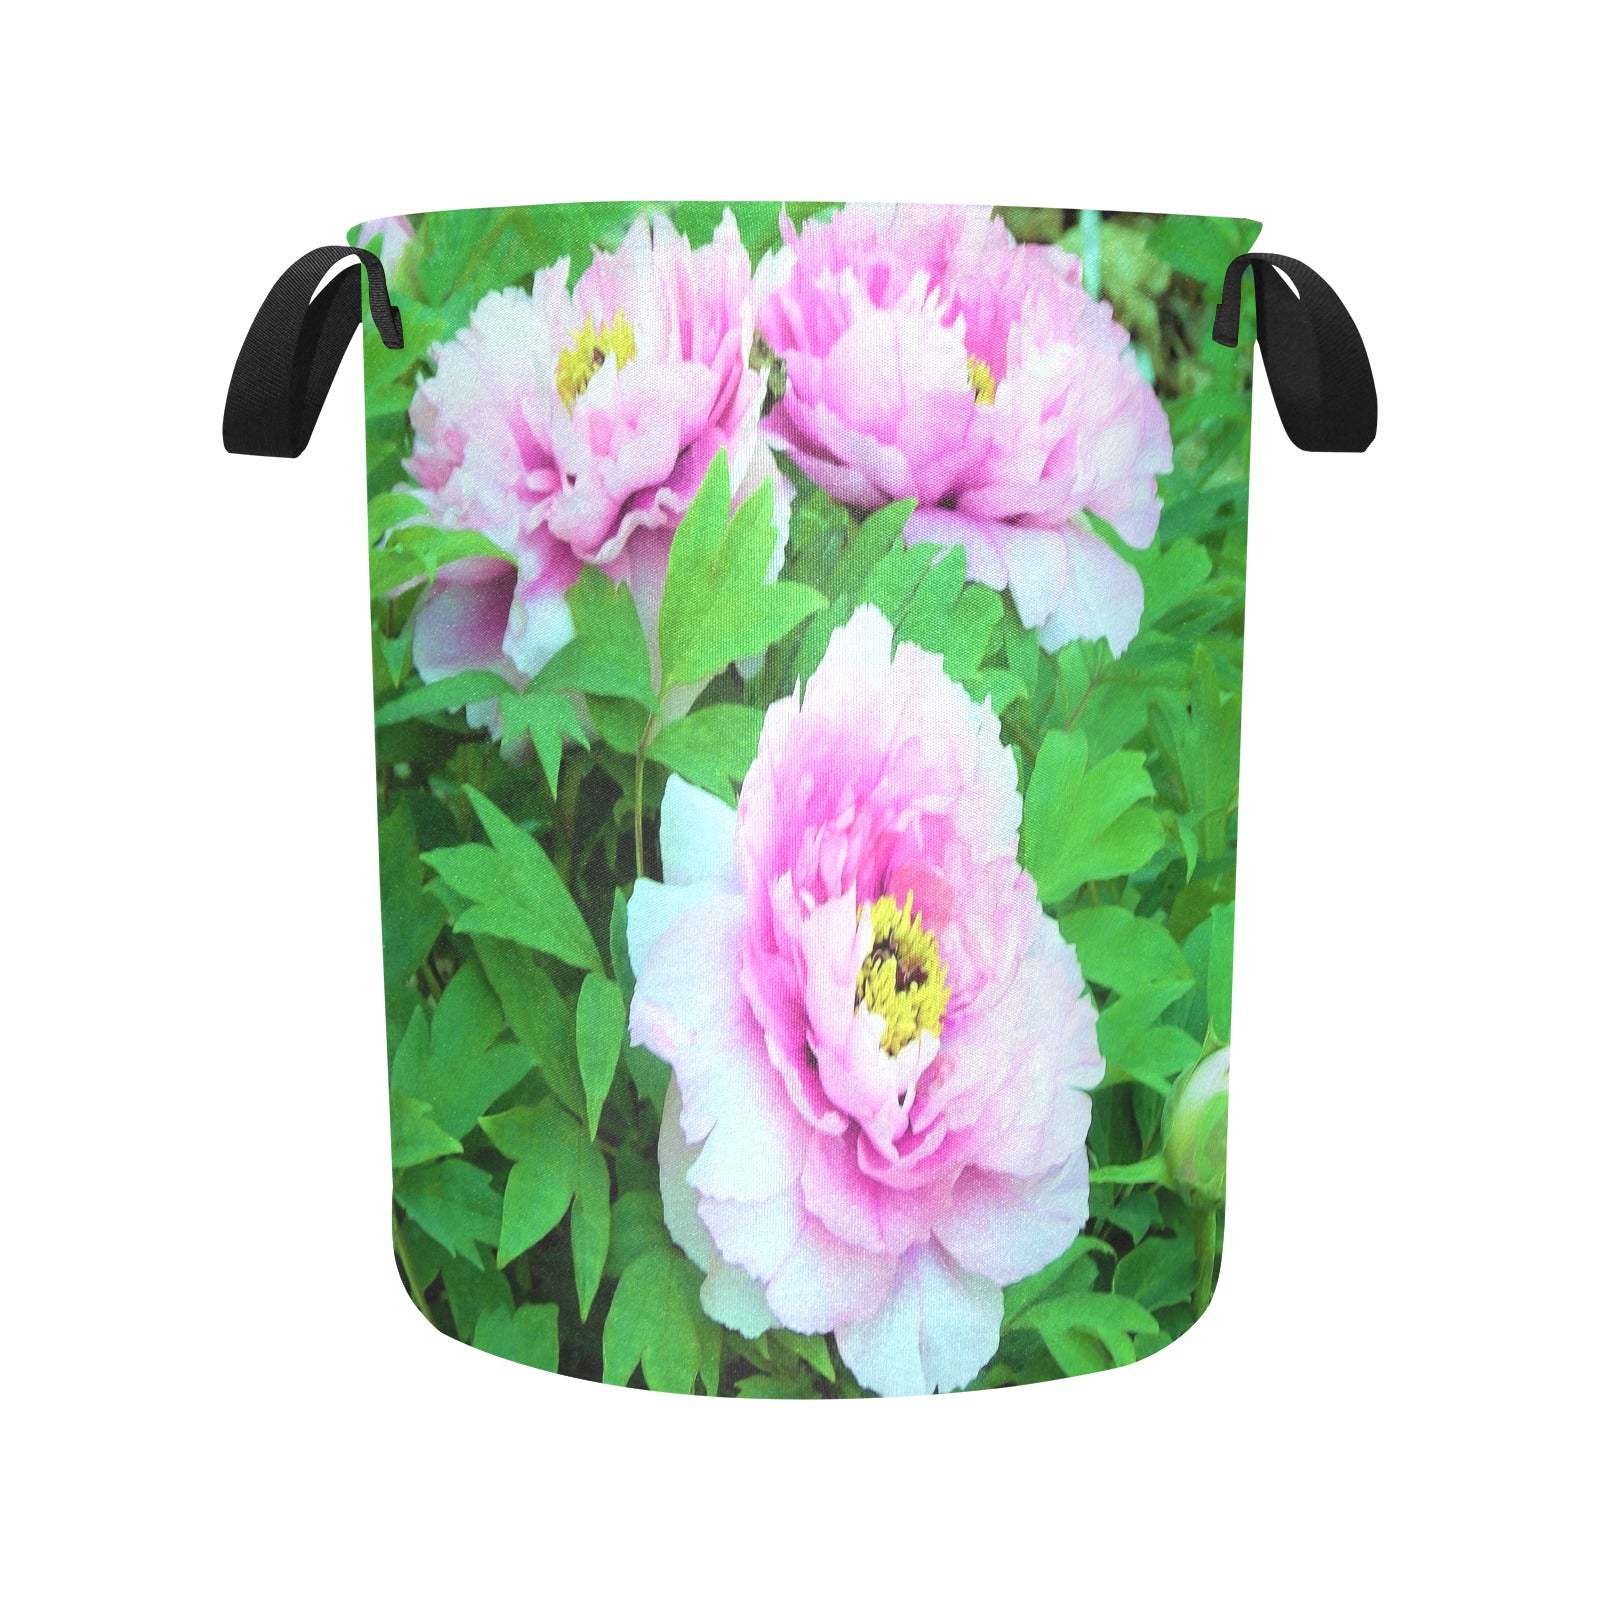 Fabric Laundry Basket with Handles, Elegant Pink Tree Peony Flowers with Yellow Centers